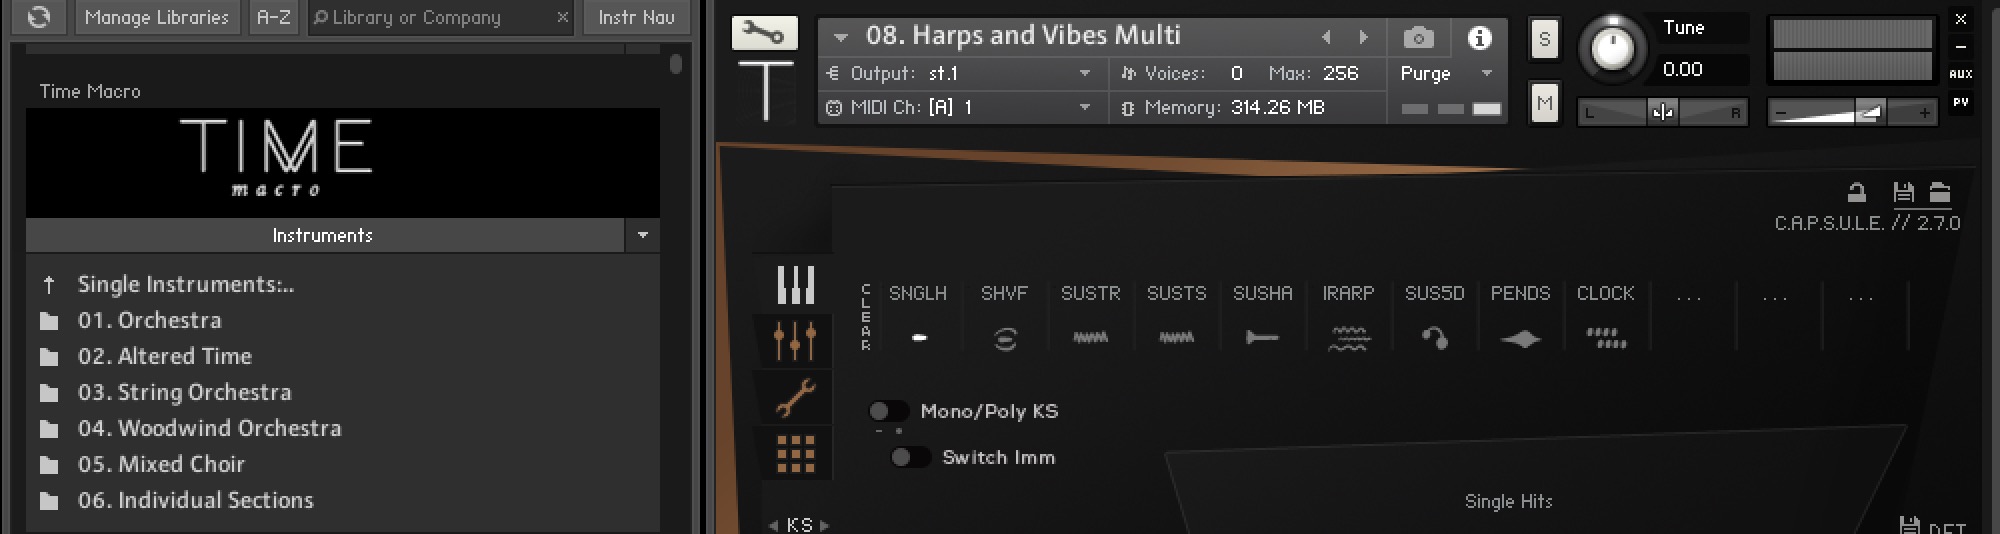 TIME macro by Orchestral Tools Review Single Instruments